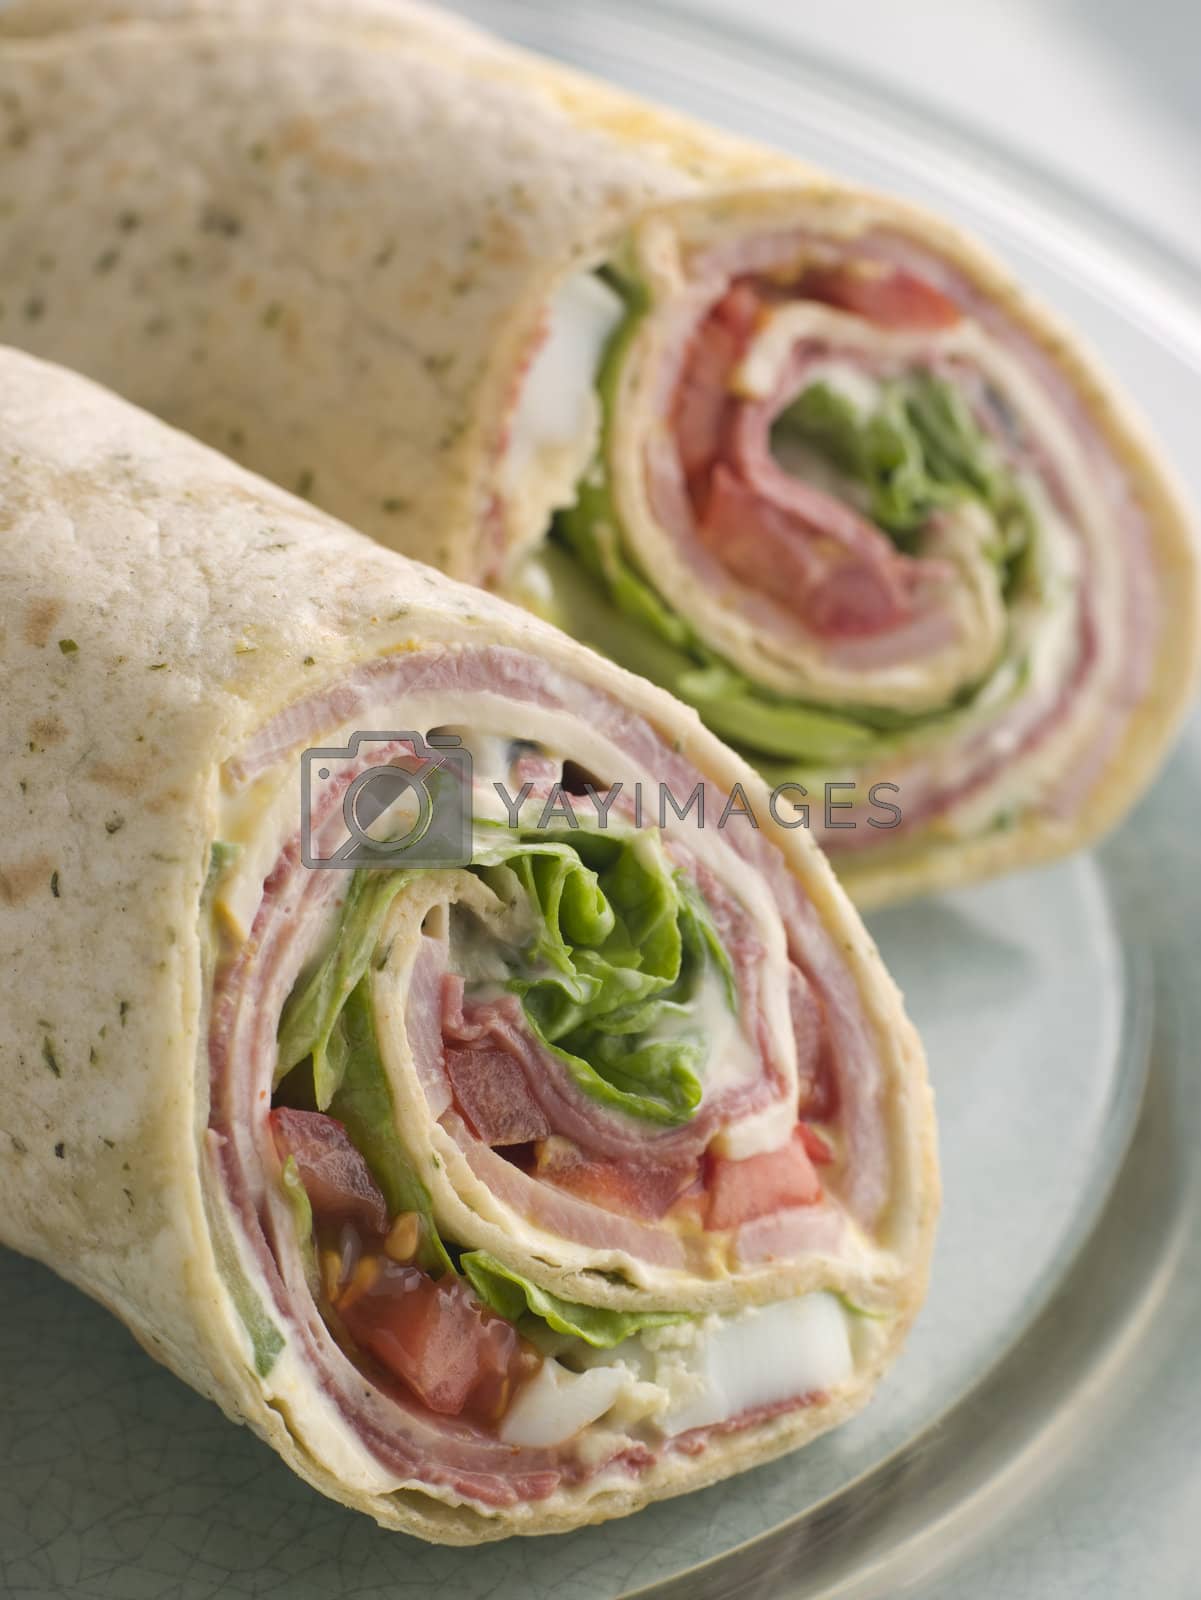 Royalty free image of Deli Tortilla Wrap Cut in Half by MonkeyBusiness